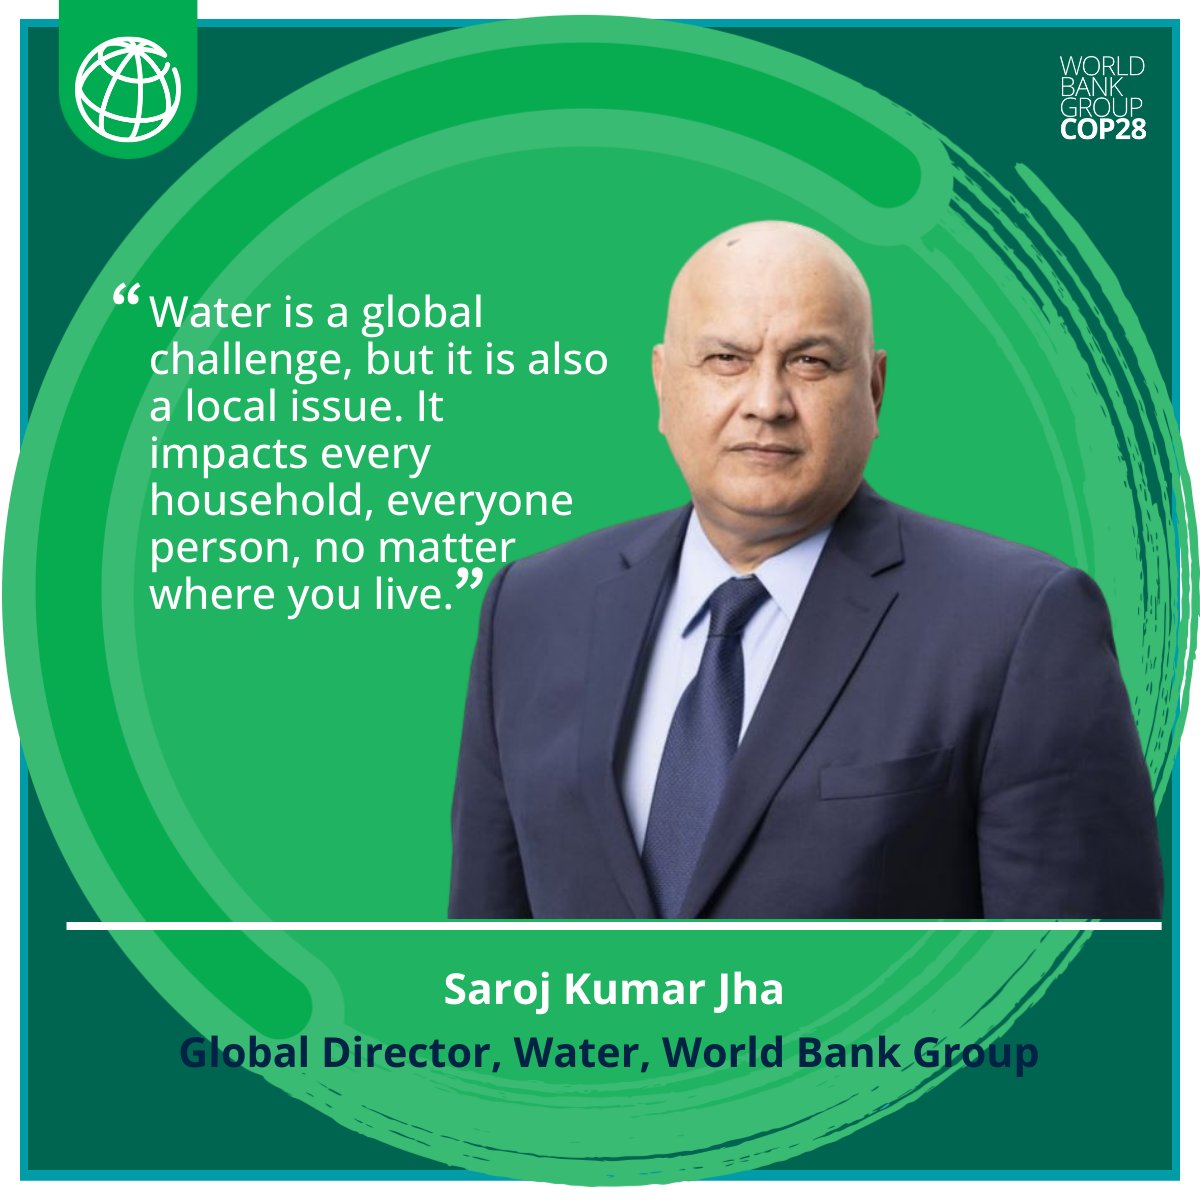 Water is a global #COP28 priority that needs highly local solutions. The @WorldBank works with communities around the world to sustain water resources, deliver services, and build resilience for a #LivablePlanet. @SarojJha001